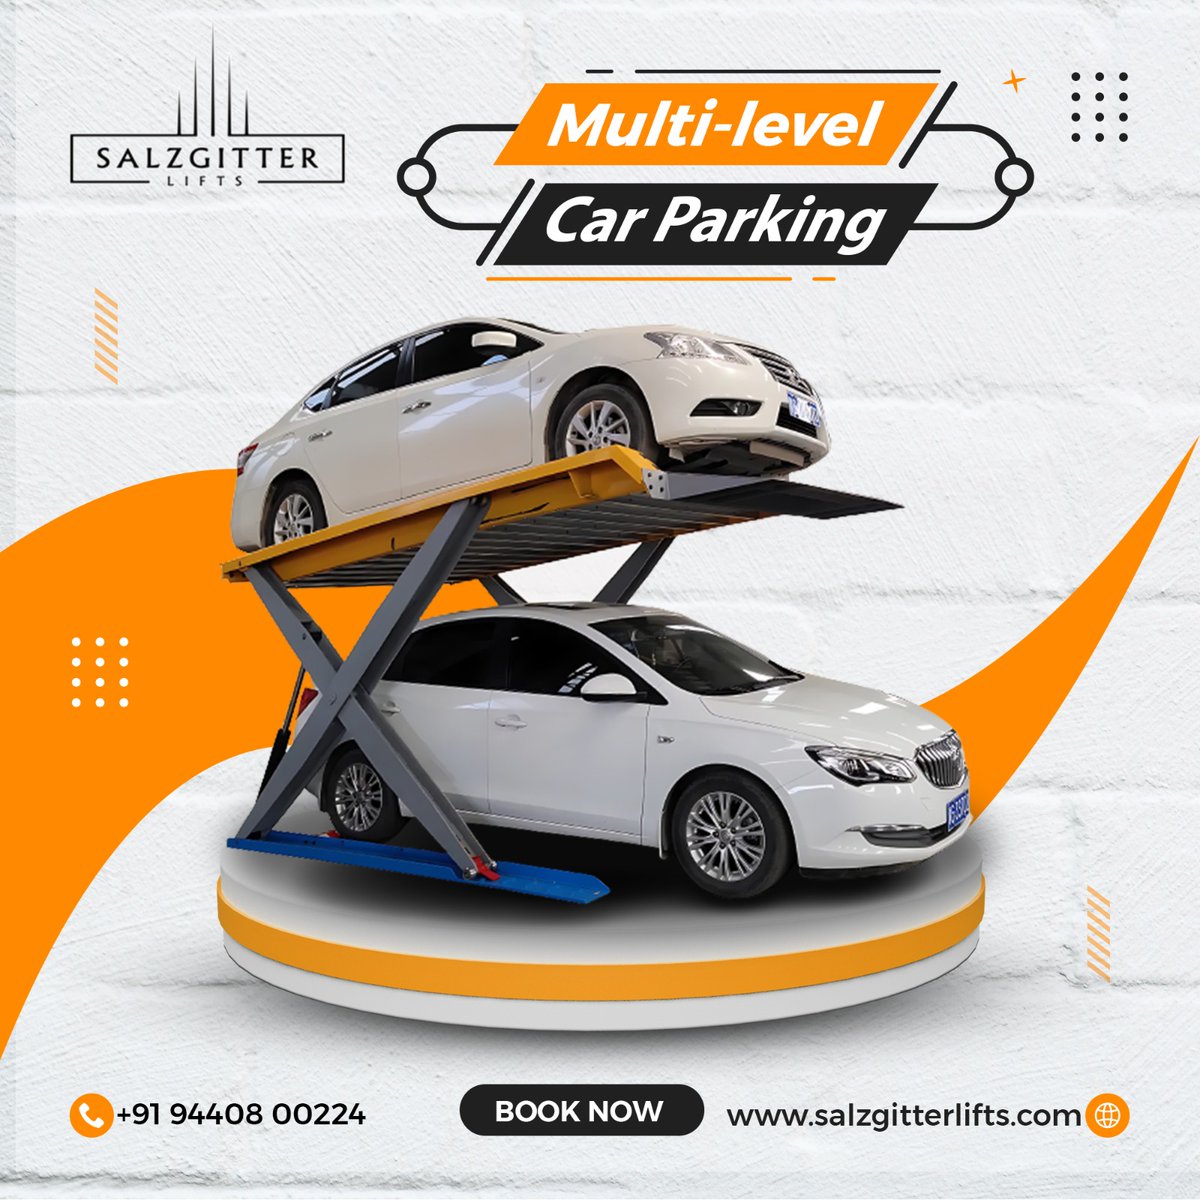 Multilevel Car Parking  Available at Salzgitter Lifts
Call To Find Out More +91 94408 00224
Visit For More Info - salzgitterlifts.com
.
.
.
#multilevelparking #parkinglifts #easyparking #salzgitter #salzgiterlifts #Hyderabad #Gachibowli #elevatorshaft #lifts #liftmanufactures